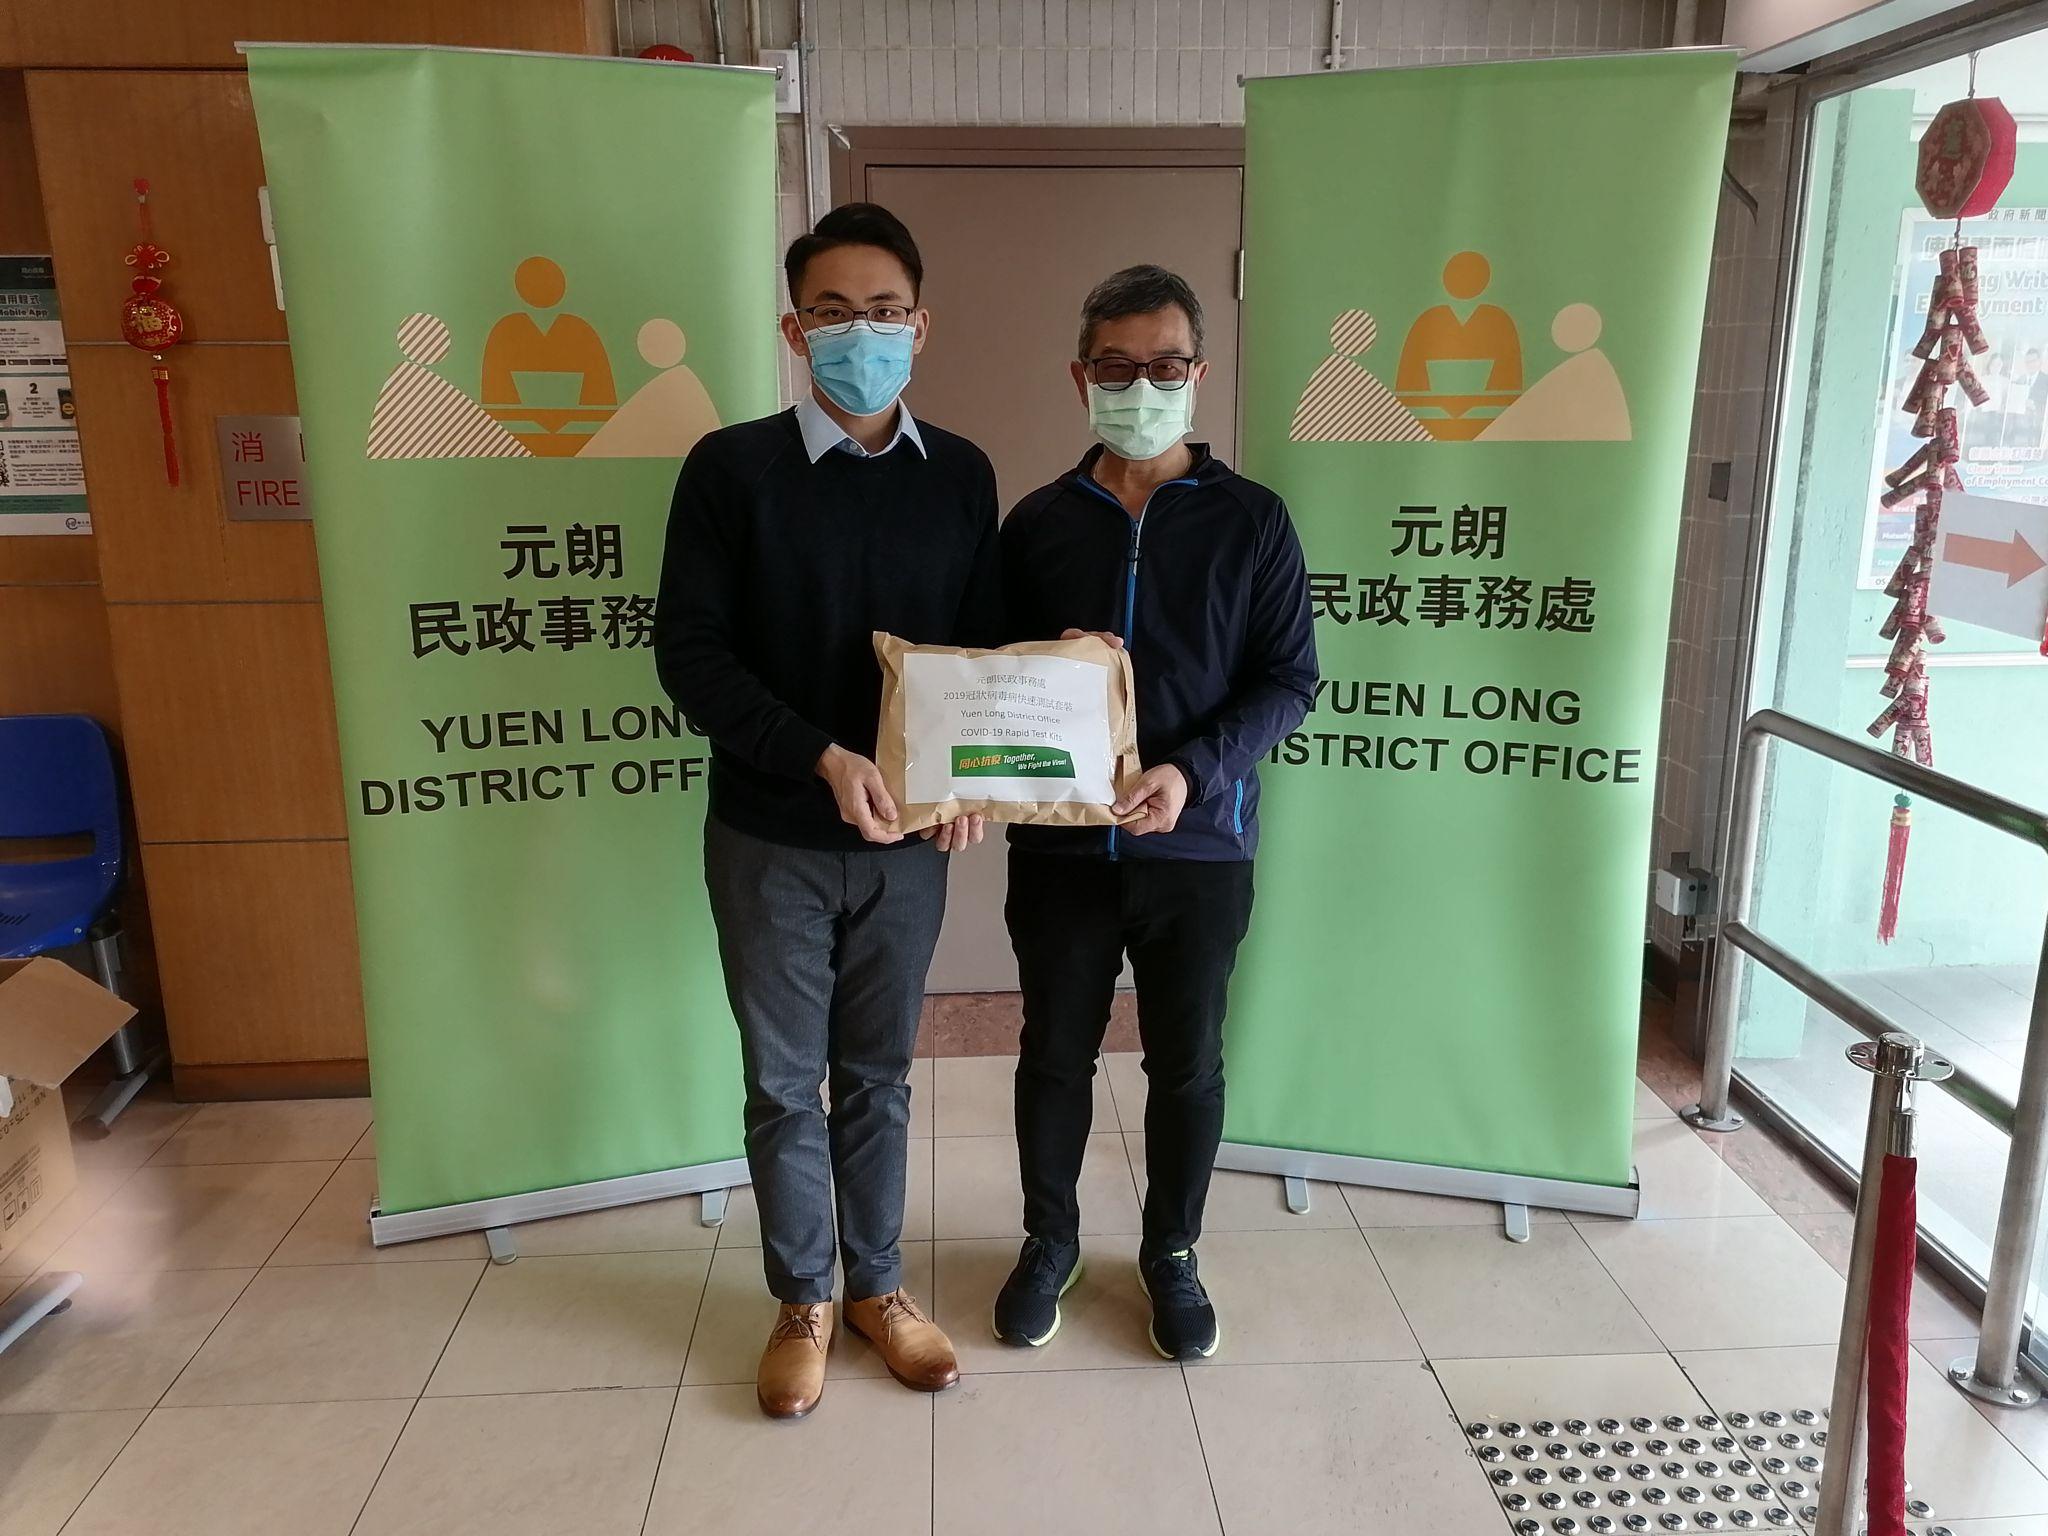 The Yuen Long District Office today (February 12) distributed rapid test kits to households, cleansing workers and property management staff living and working in the affected buildings in the area around Wang Fung Building, Yuen San Building and Po On Building for voluntary testing together with owners' corporations, property management companies and local organisations.